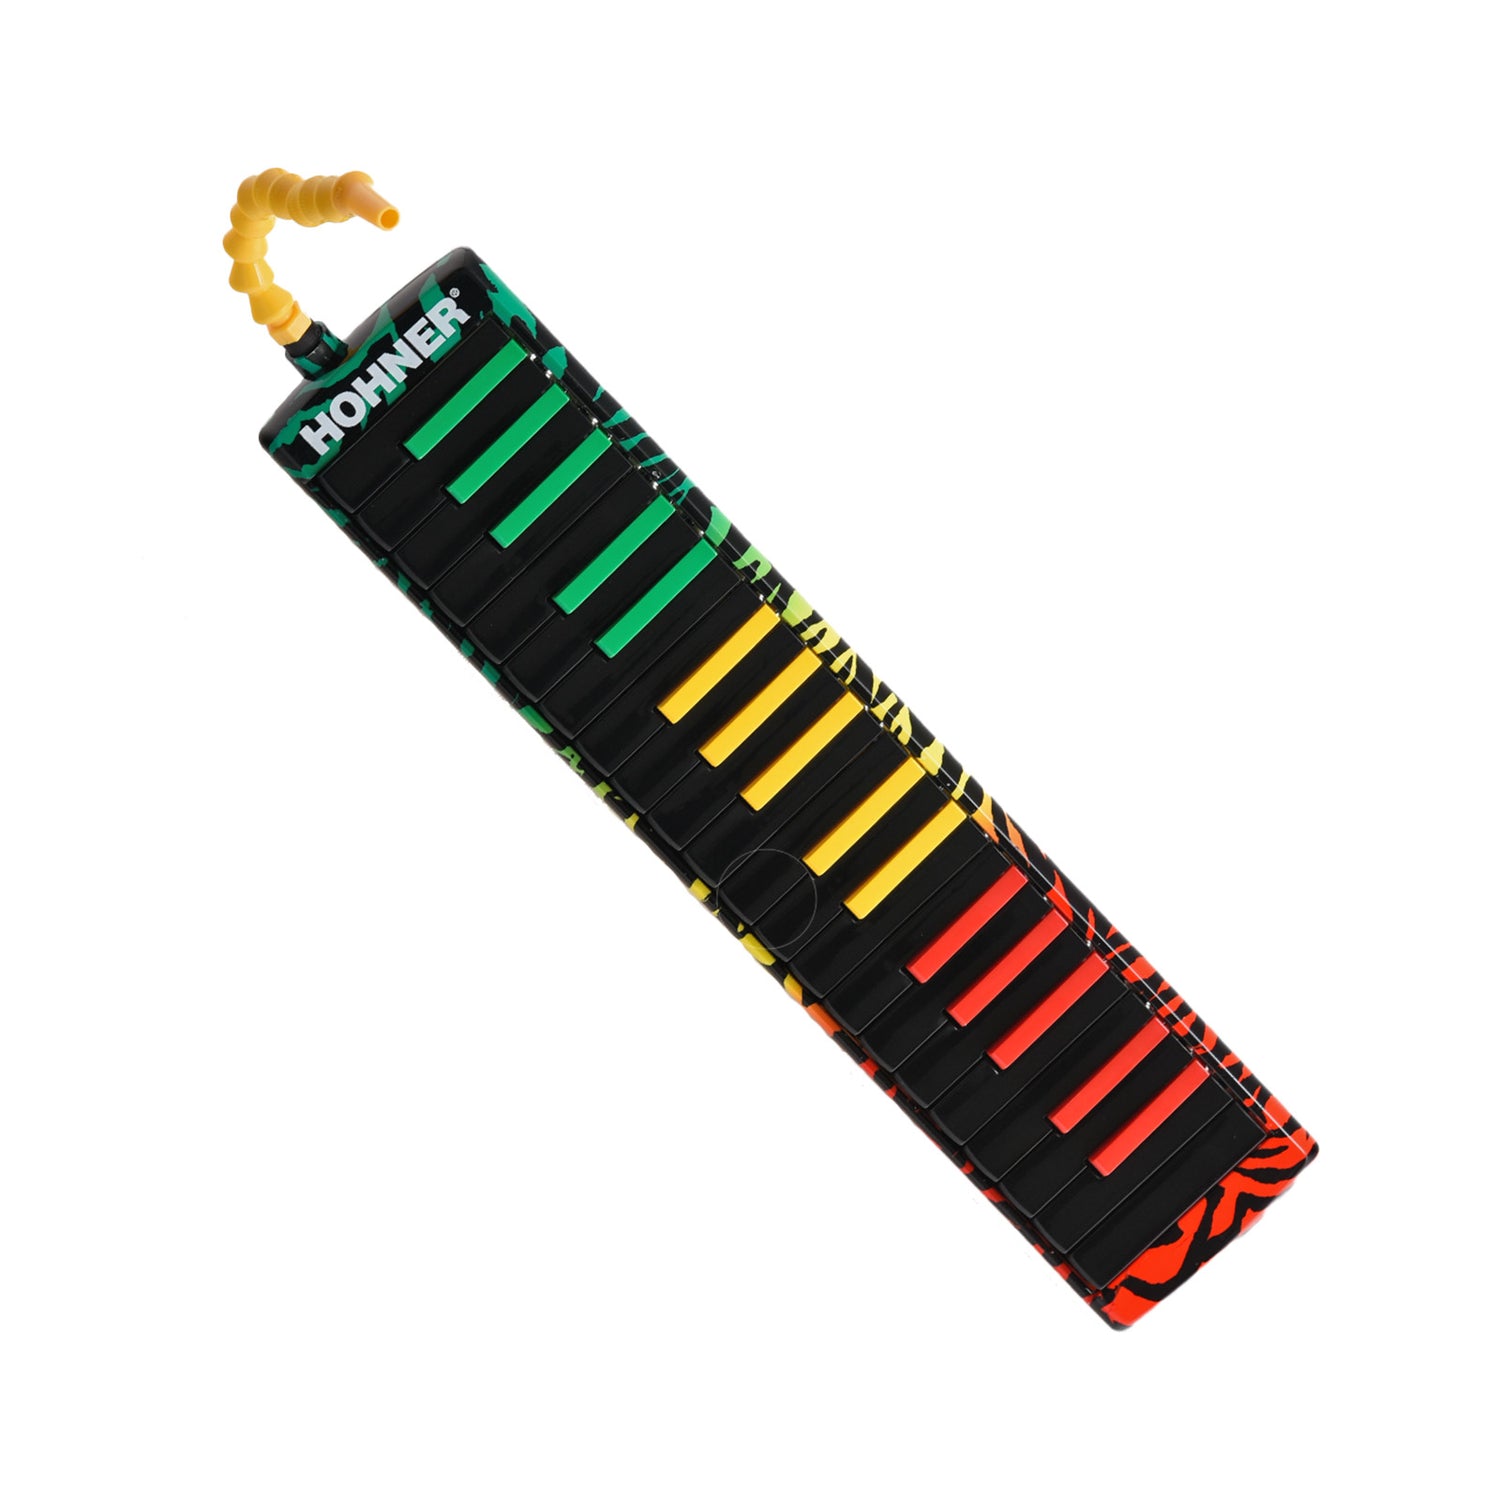 Image 1 of Hohner Airboard 37 37-Key Air-Powered Keyboard, Rasta Design/Colors - SKU# AB37R : Product Type Wind Instruments : Elderly Instruments